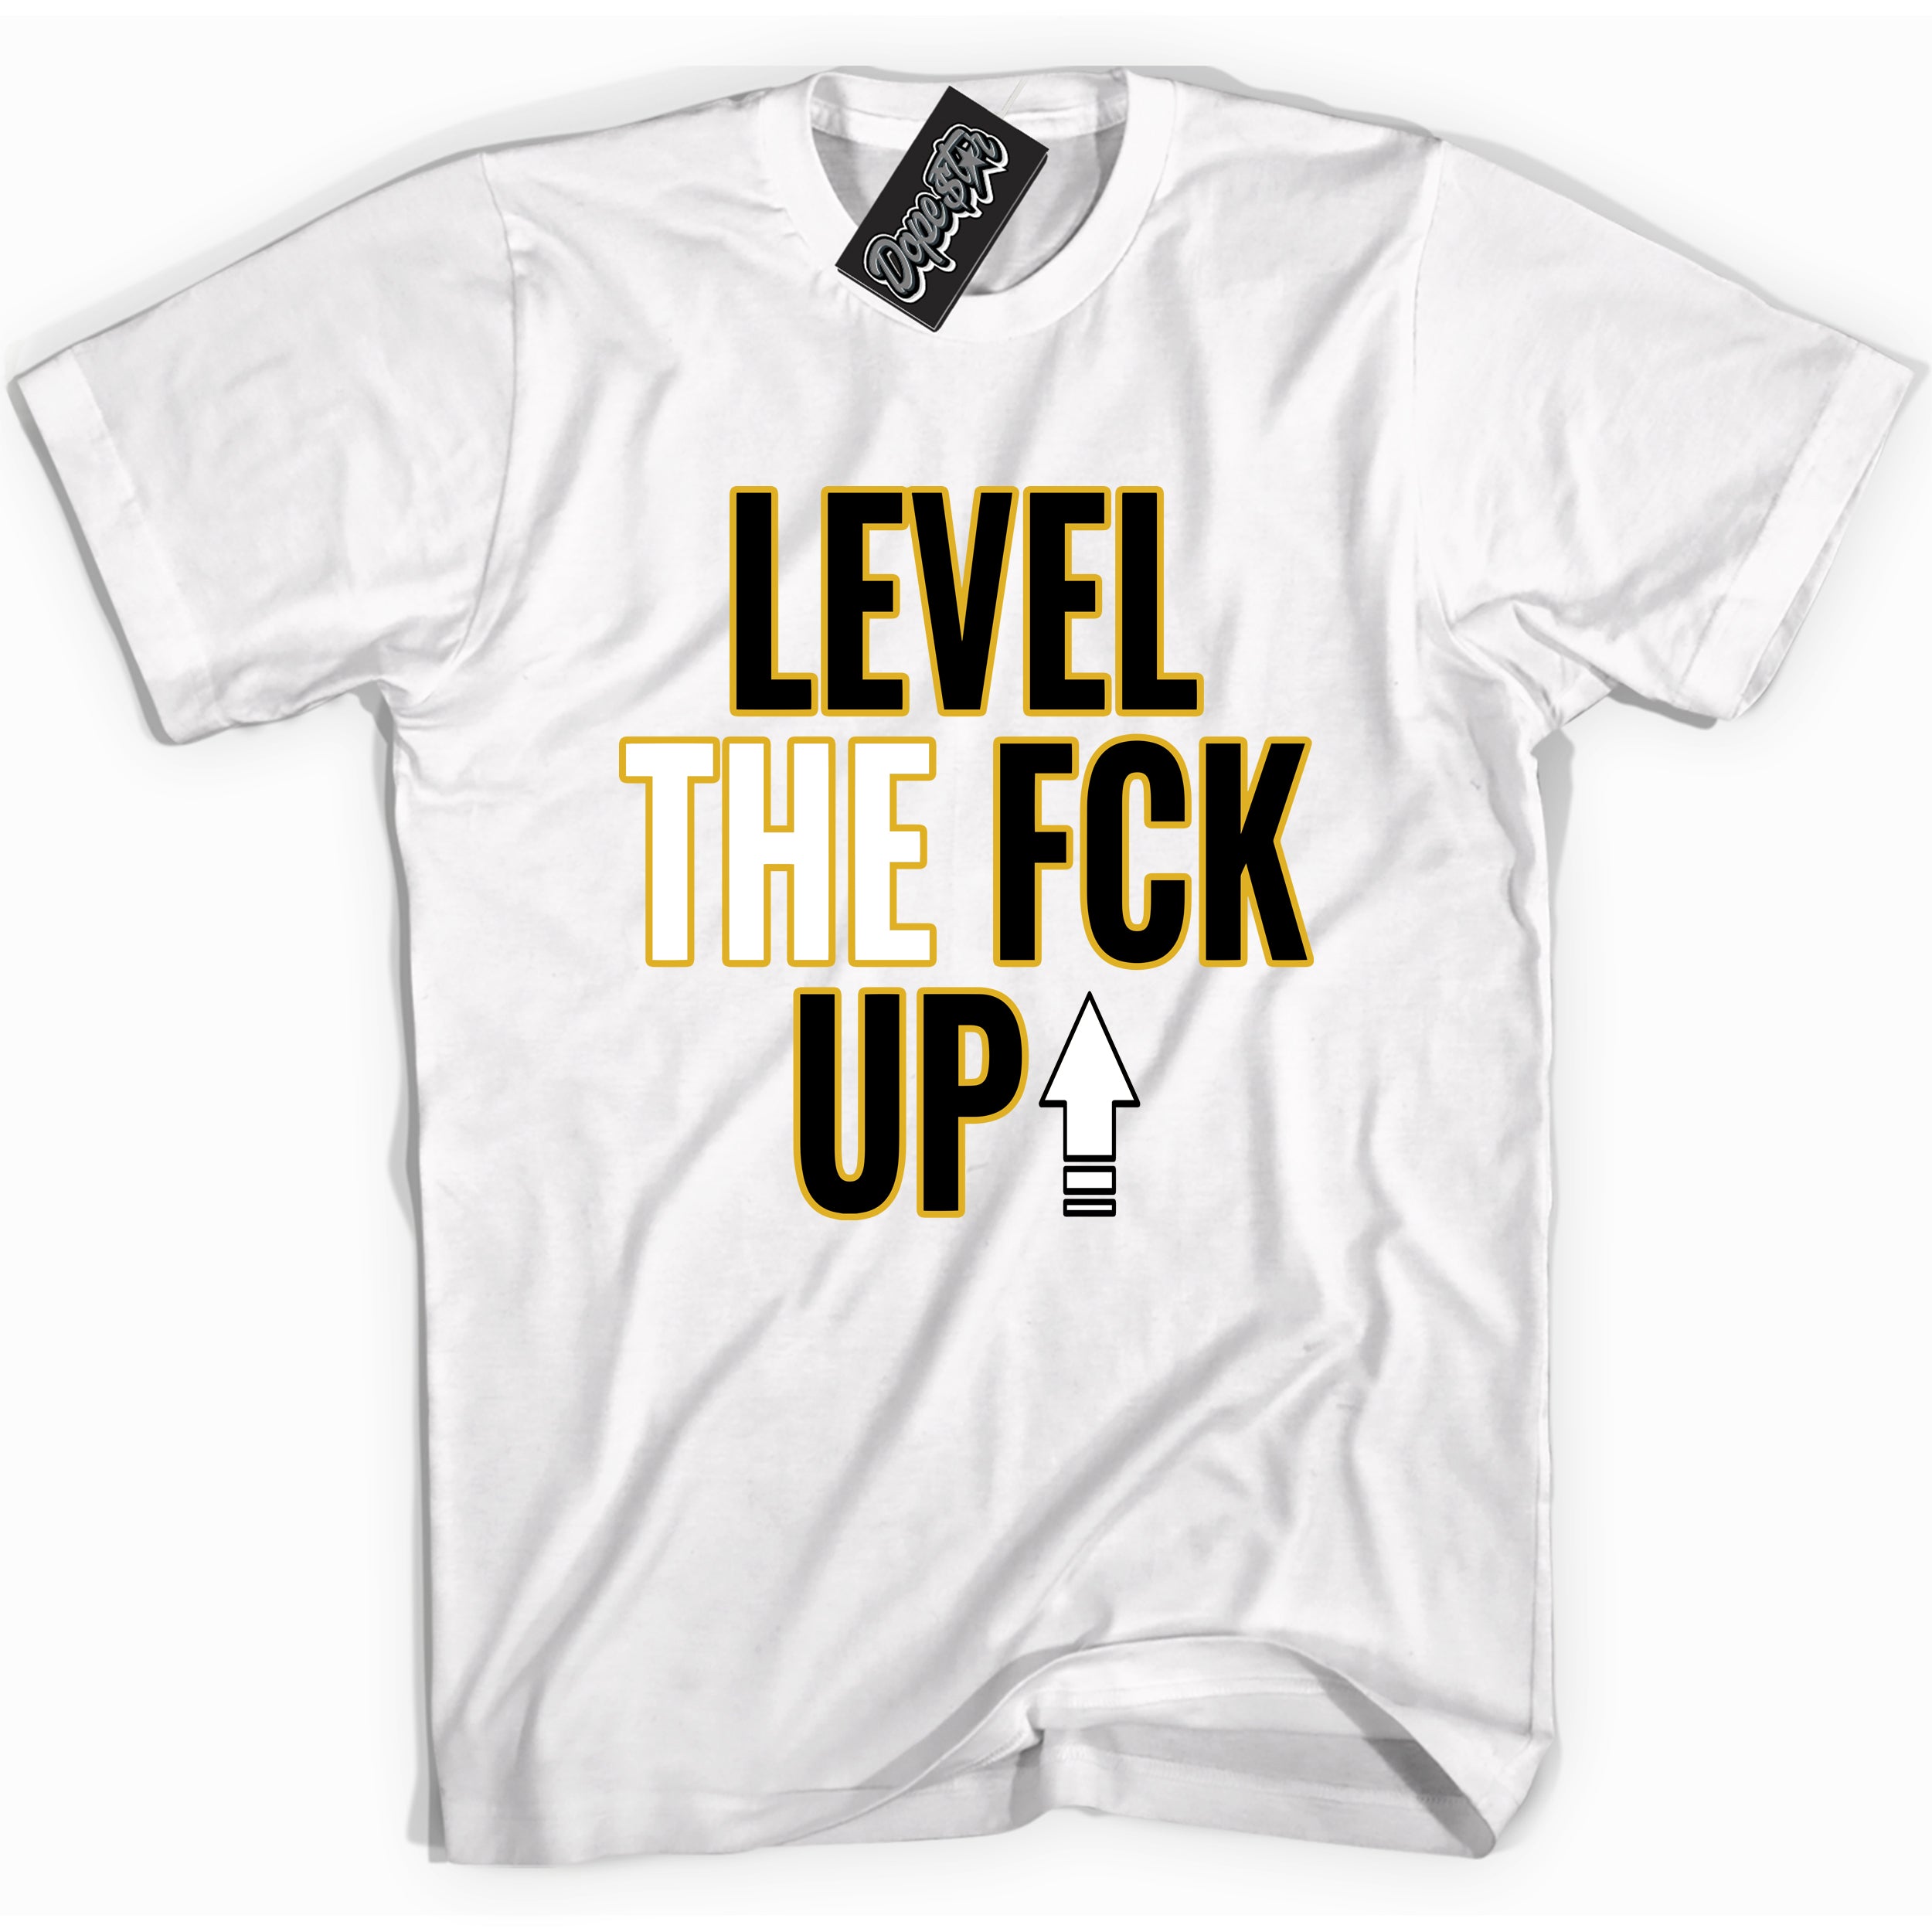 Cool White Shirt with “ Level The Fck Up” design that perfectly matches Yellow Ochre 6s Sneakers.